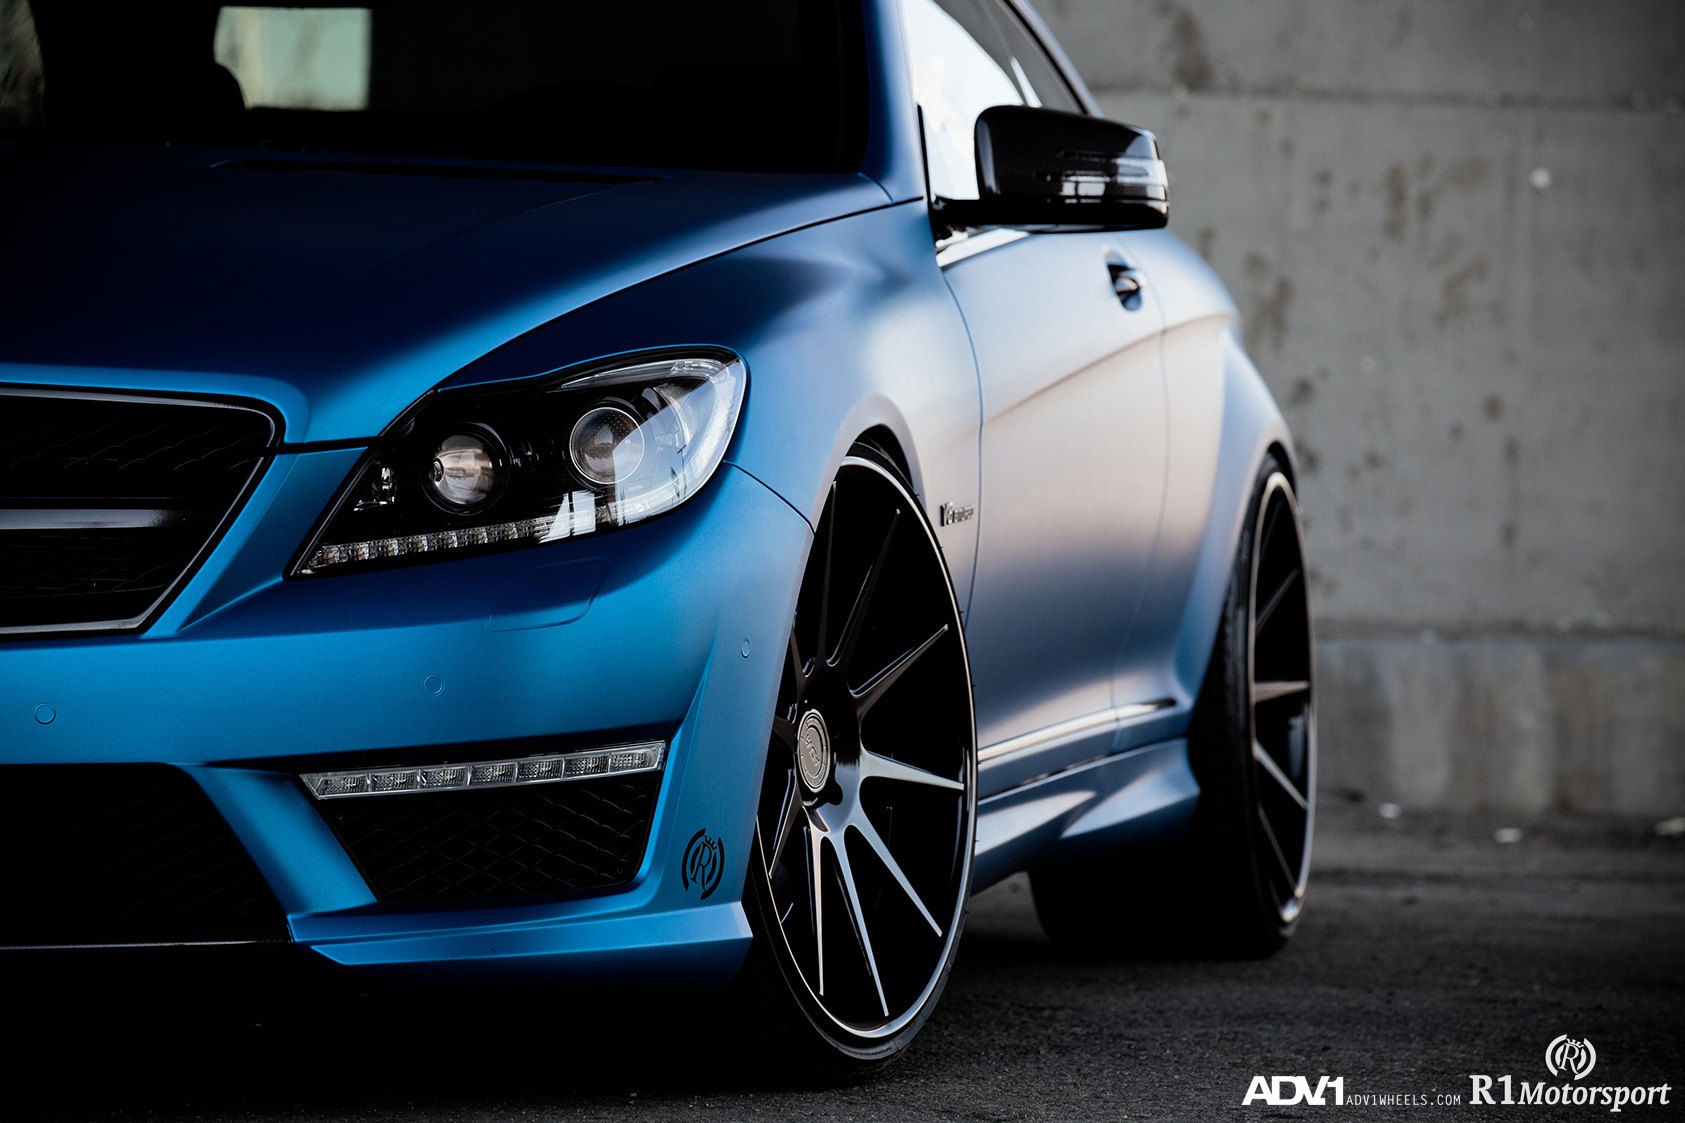 Gloss Black ADV1 Rims Fitted on Blue Mercedes CL - Photo by ADV.1